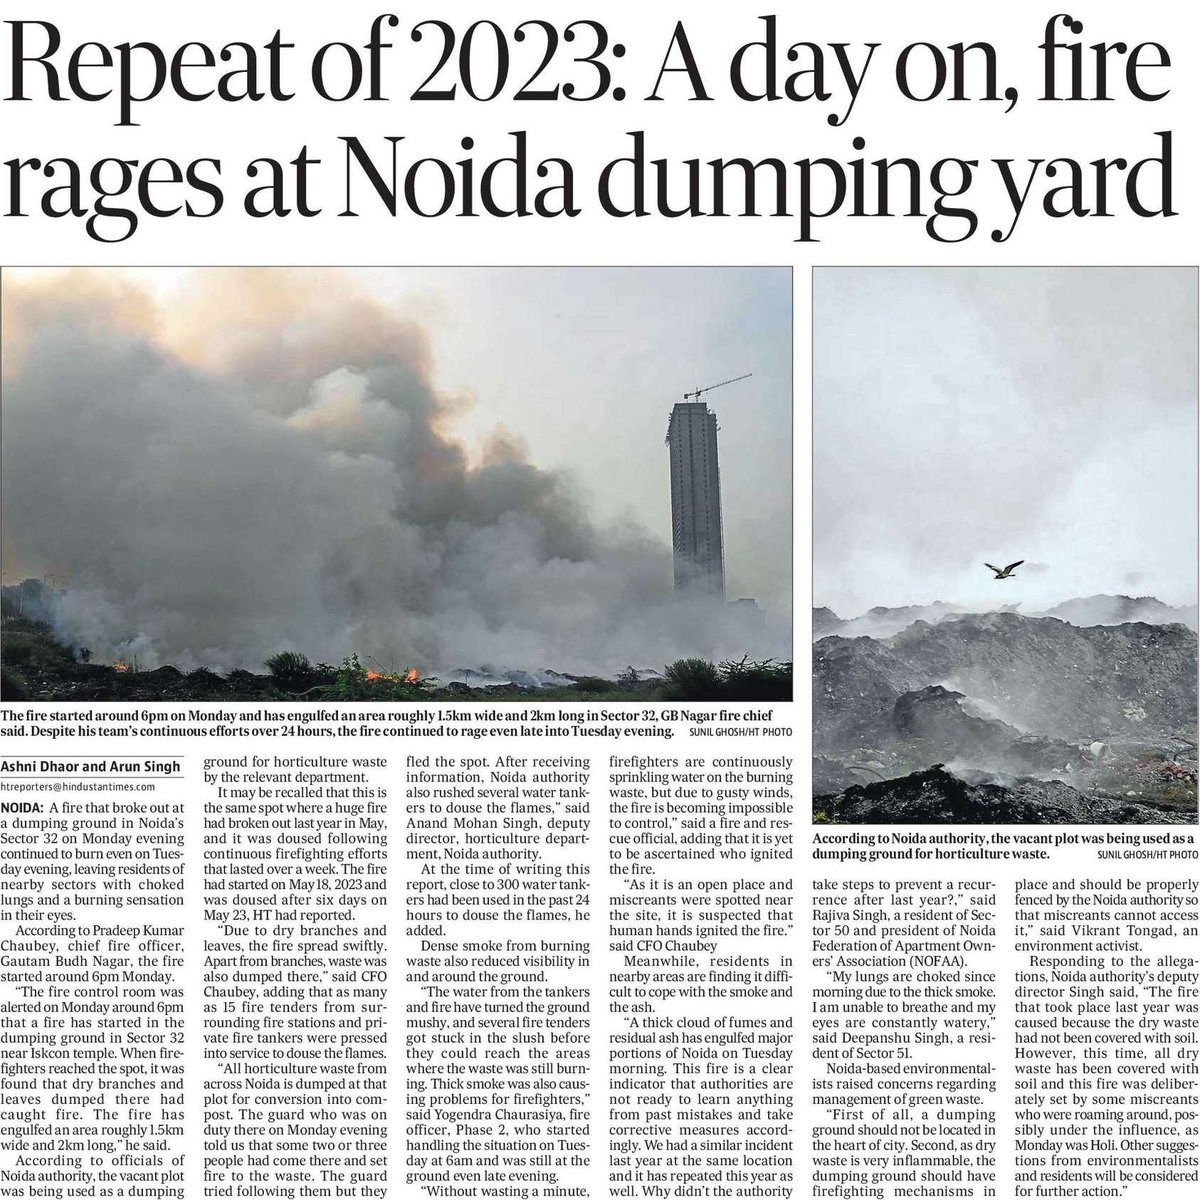 Repeat of 2023 as @cfonoida continue firefighting. Residents in nearby areas are finding it difficult to cope with the smoke and the ash. @Rajiva2011 Environmentalists raised concerns regarding management of green waste by @noida_authority Report by me and @arun__singh___